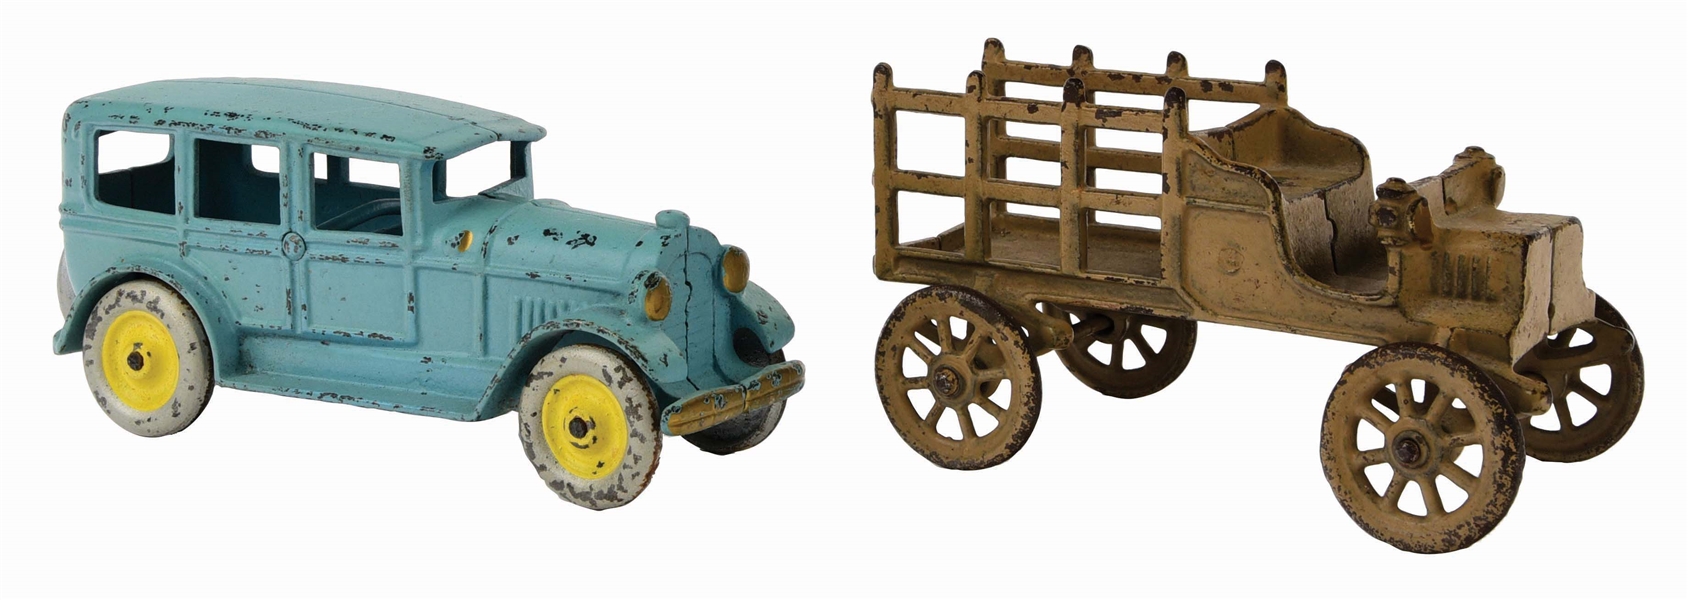 LOT OF 2: EARLY CAST-IRON AMERICAN MADE AUTOMOBILE TOYS.